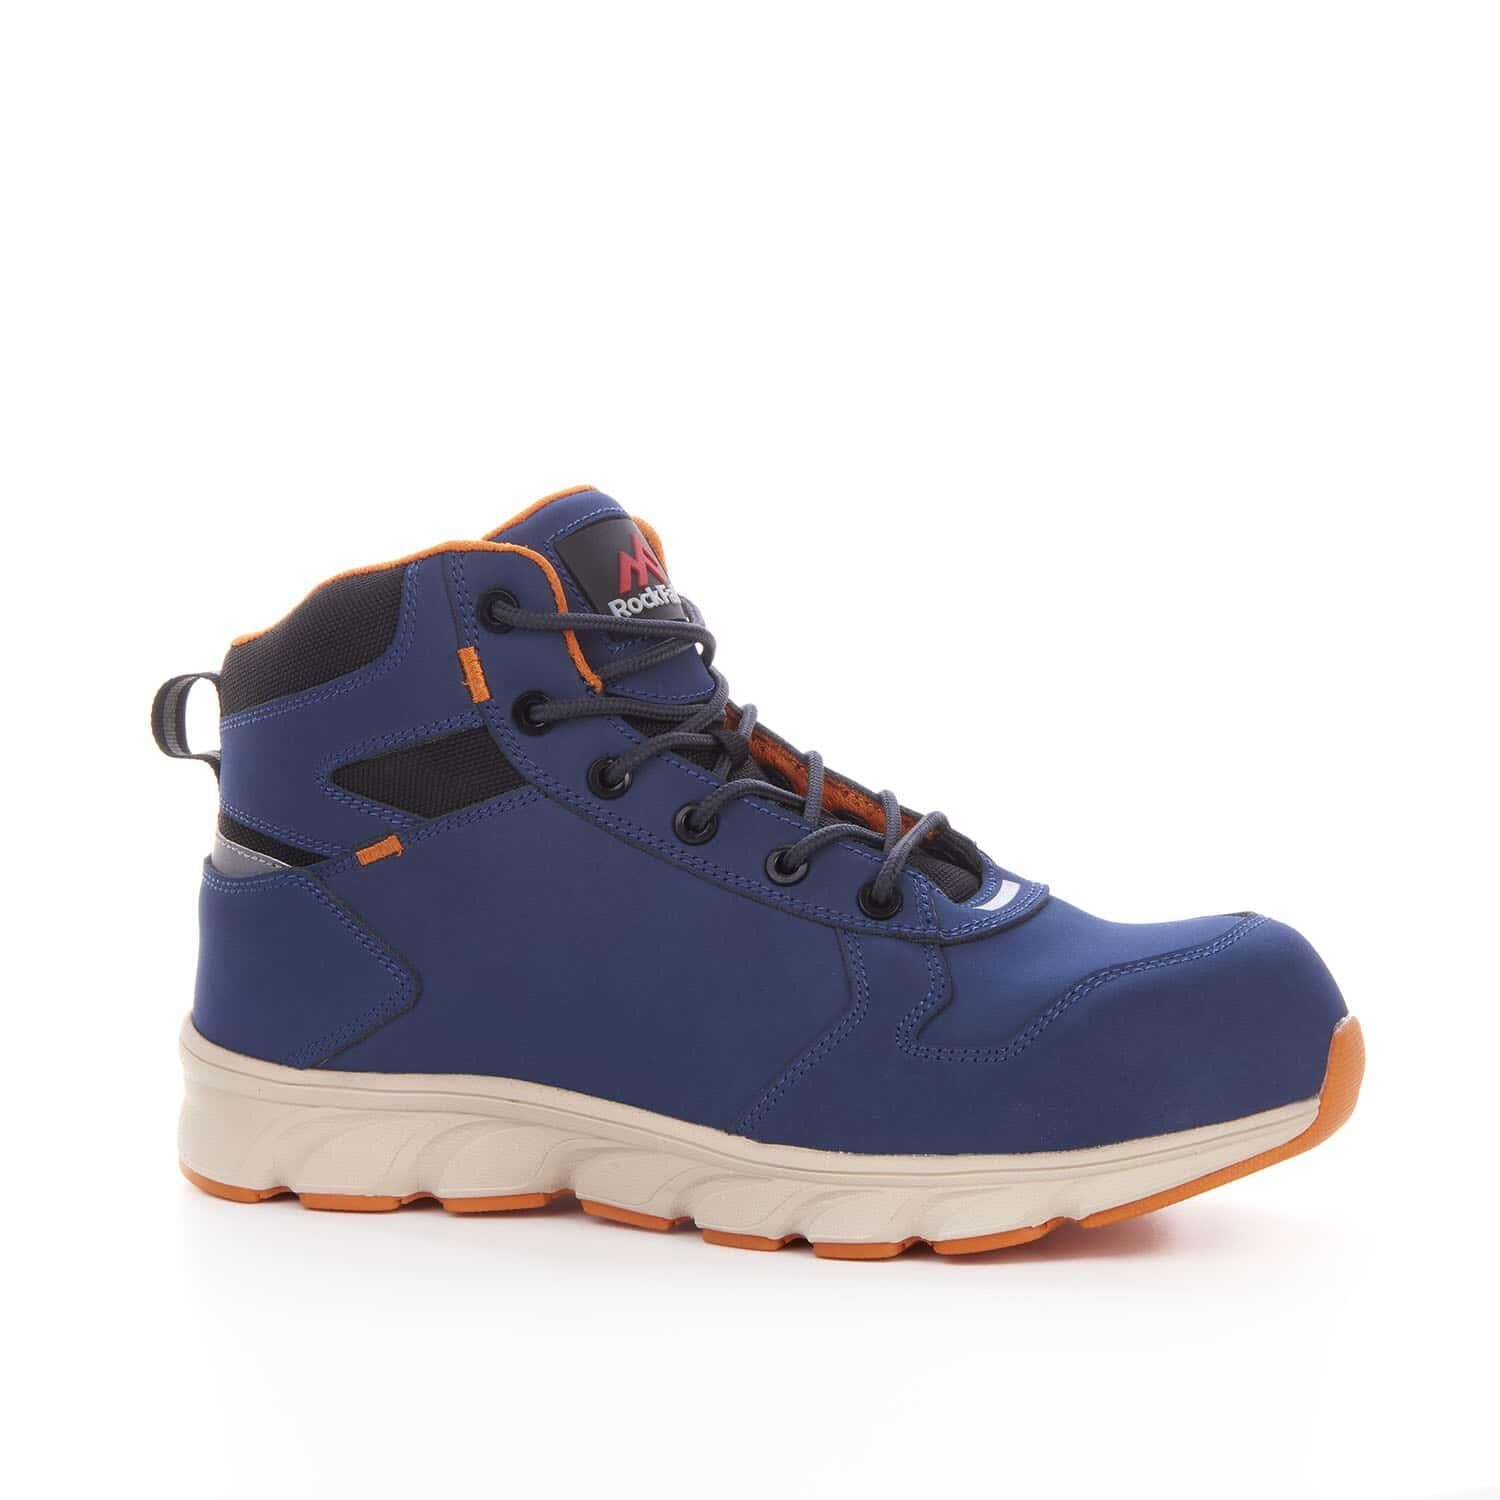 Rock Fall Michigan S3 navy blue composite toe/midsole work safety boots #RF112